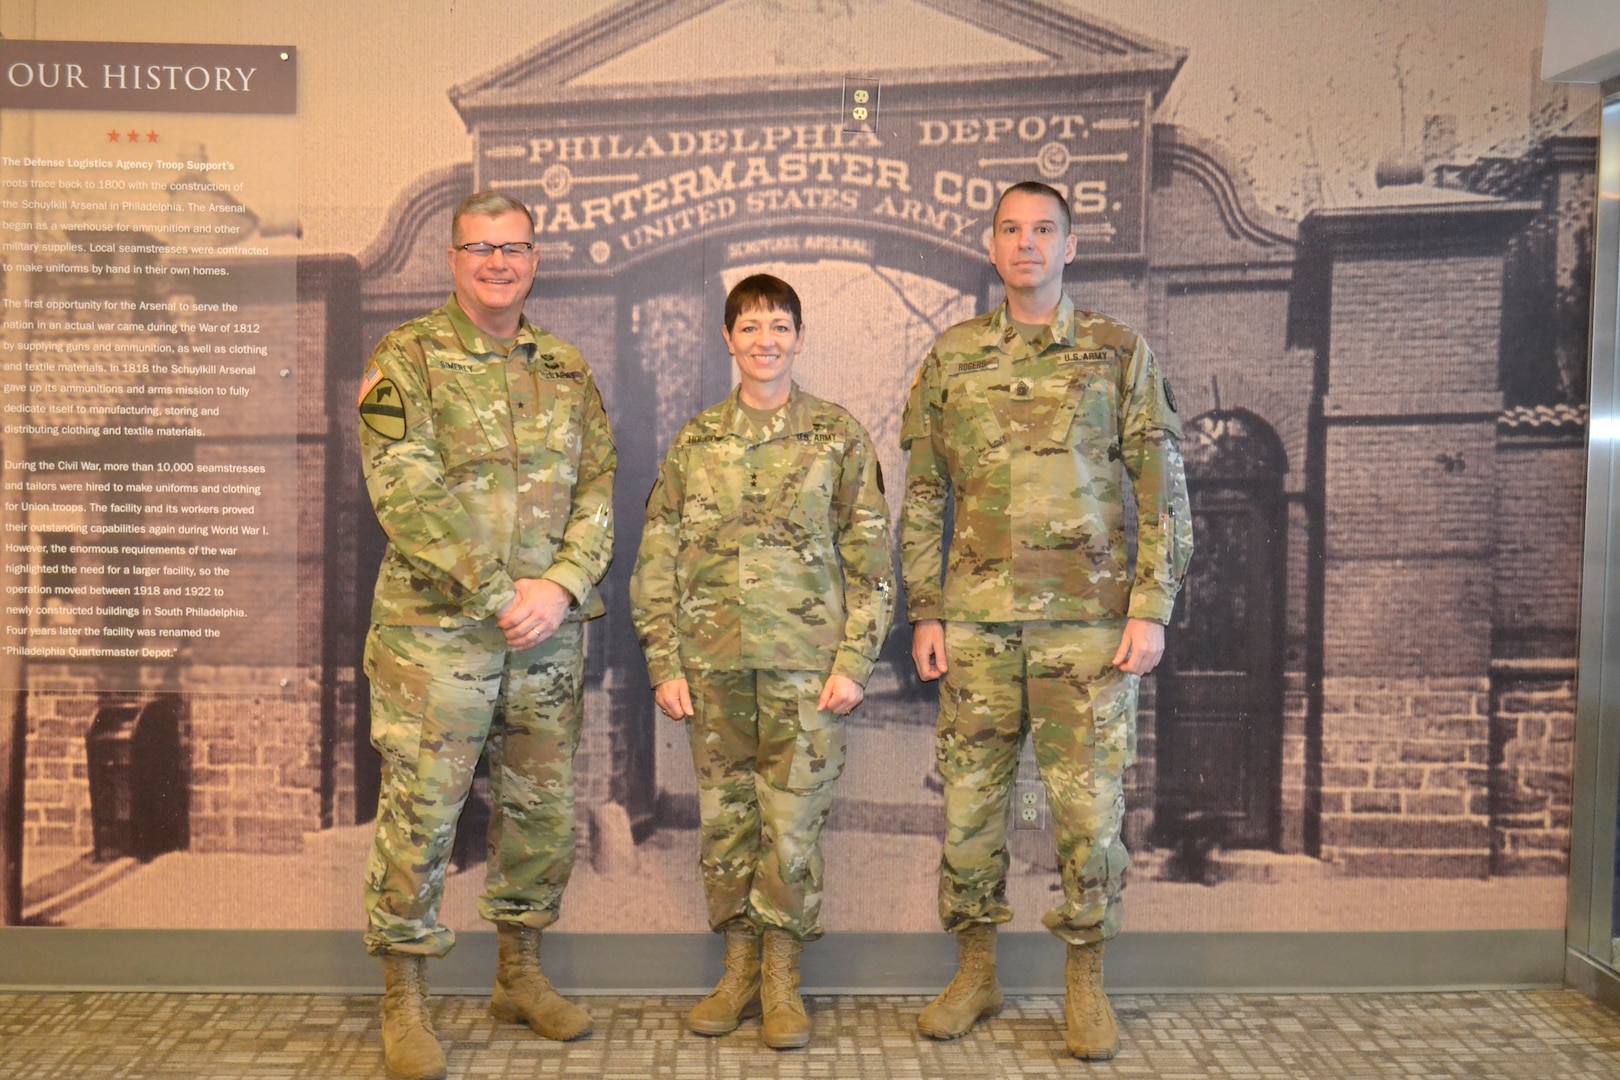 From left, Army Brig. Gen. Mark Simerly, DLA Troop Support commander, Maj. Gen. Barbara Holcomb, U.S. Army Medical Research and Material Command commanding general, and Command Sgt. Maj. David Rogers pose for a picture at DLA Troop Support, March 16, 2018 in Philadelphia.